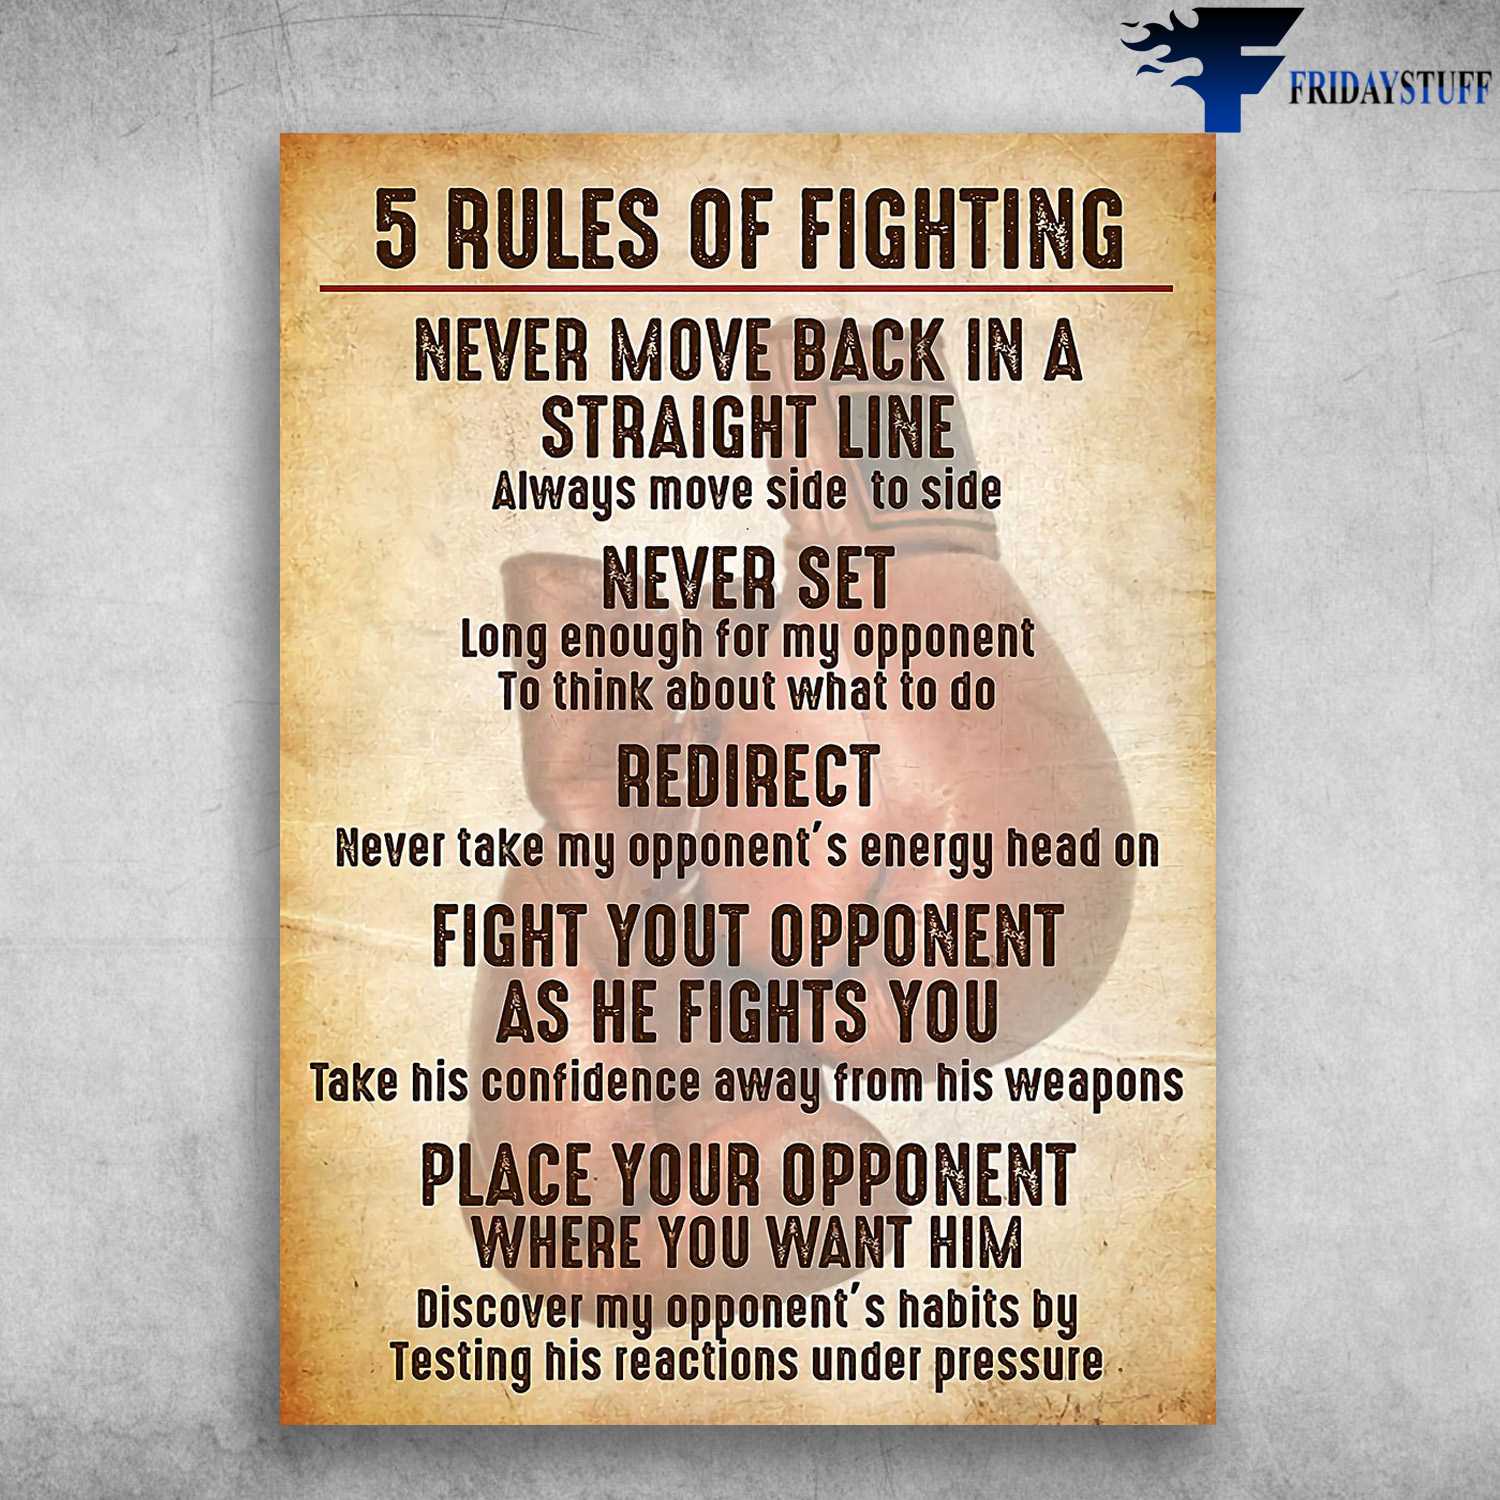 Boxing Poster - 5 Rules Of Fighting, Never Move Back In A Straight Line, Always Move Side To Side, Never Set Long Enough For My Opponent, Boxing Gloves